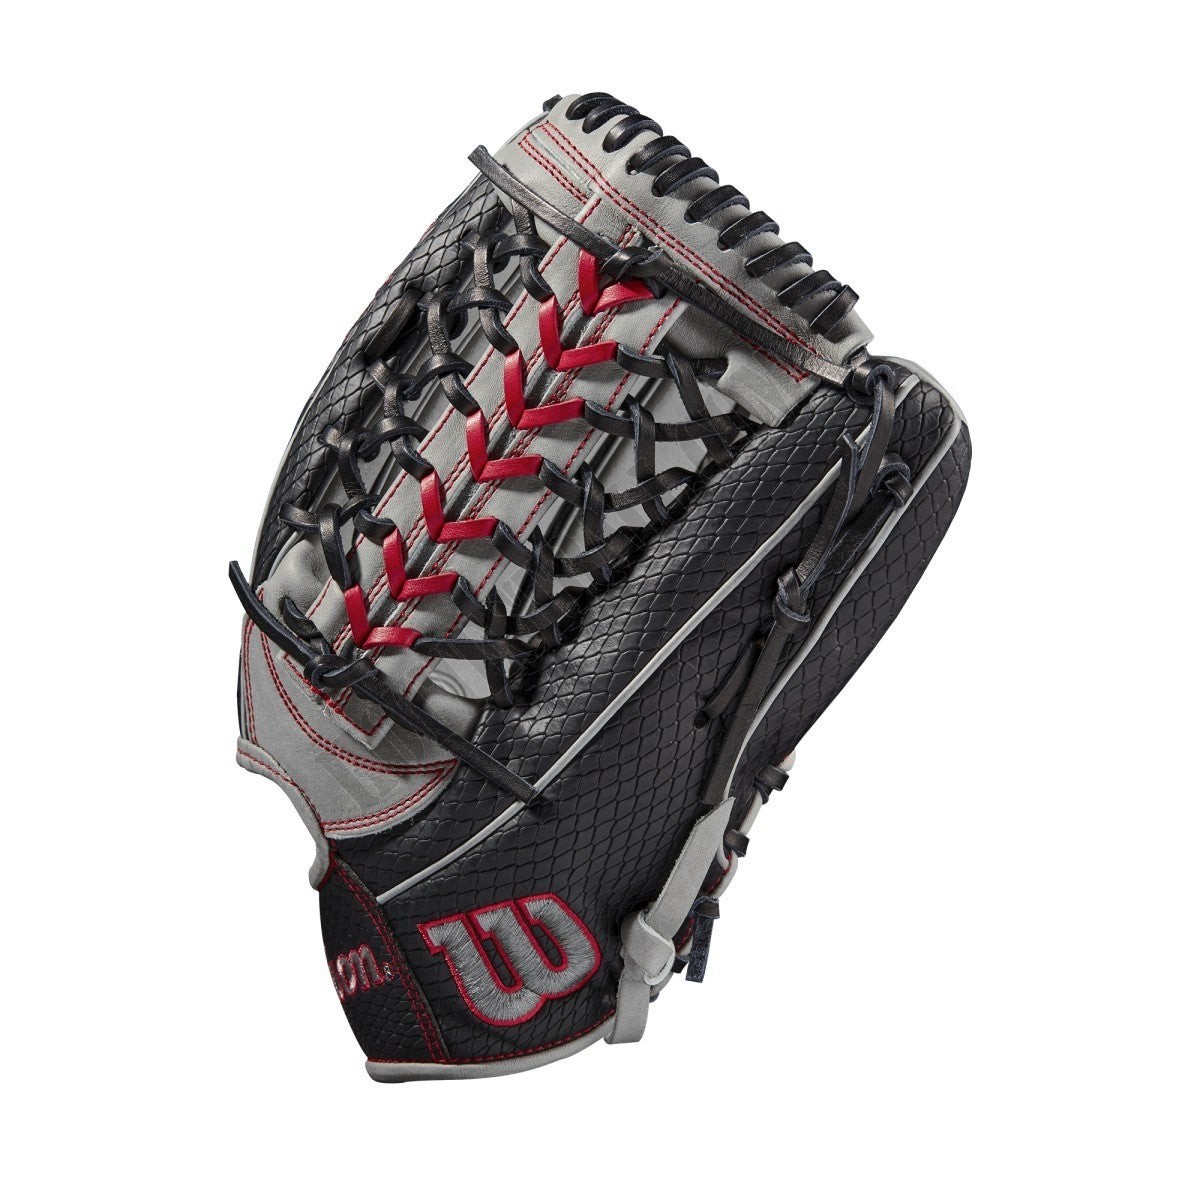 2021 A2000 PF92SS 12.25" Pedroia Fit Outfield Baseball Glove ● Wilson Promotions - -3